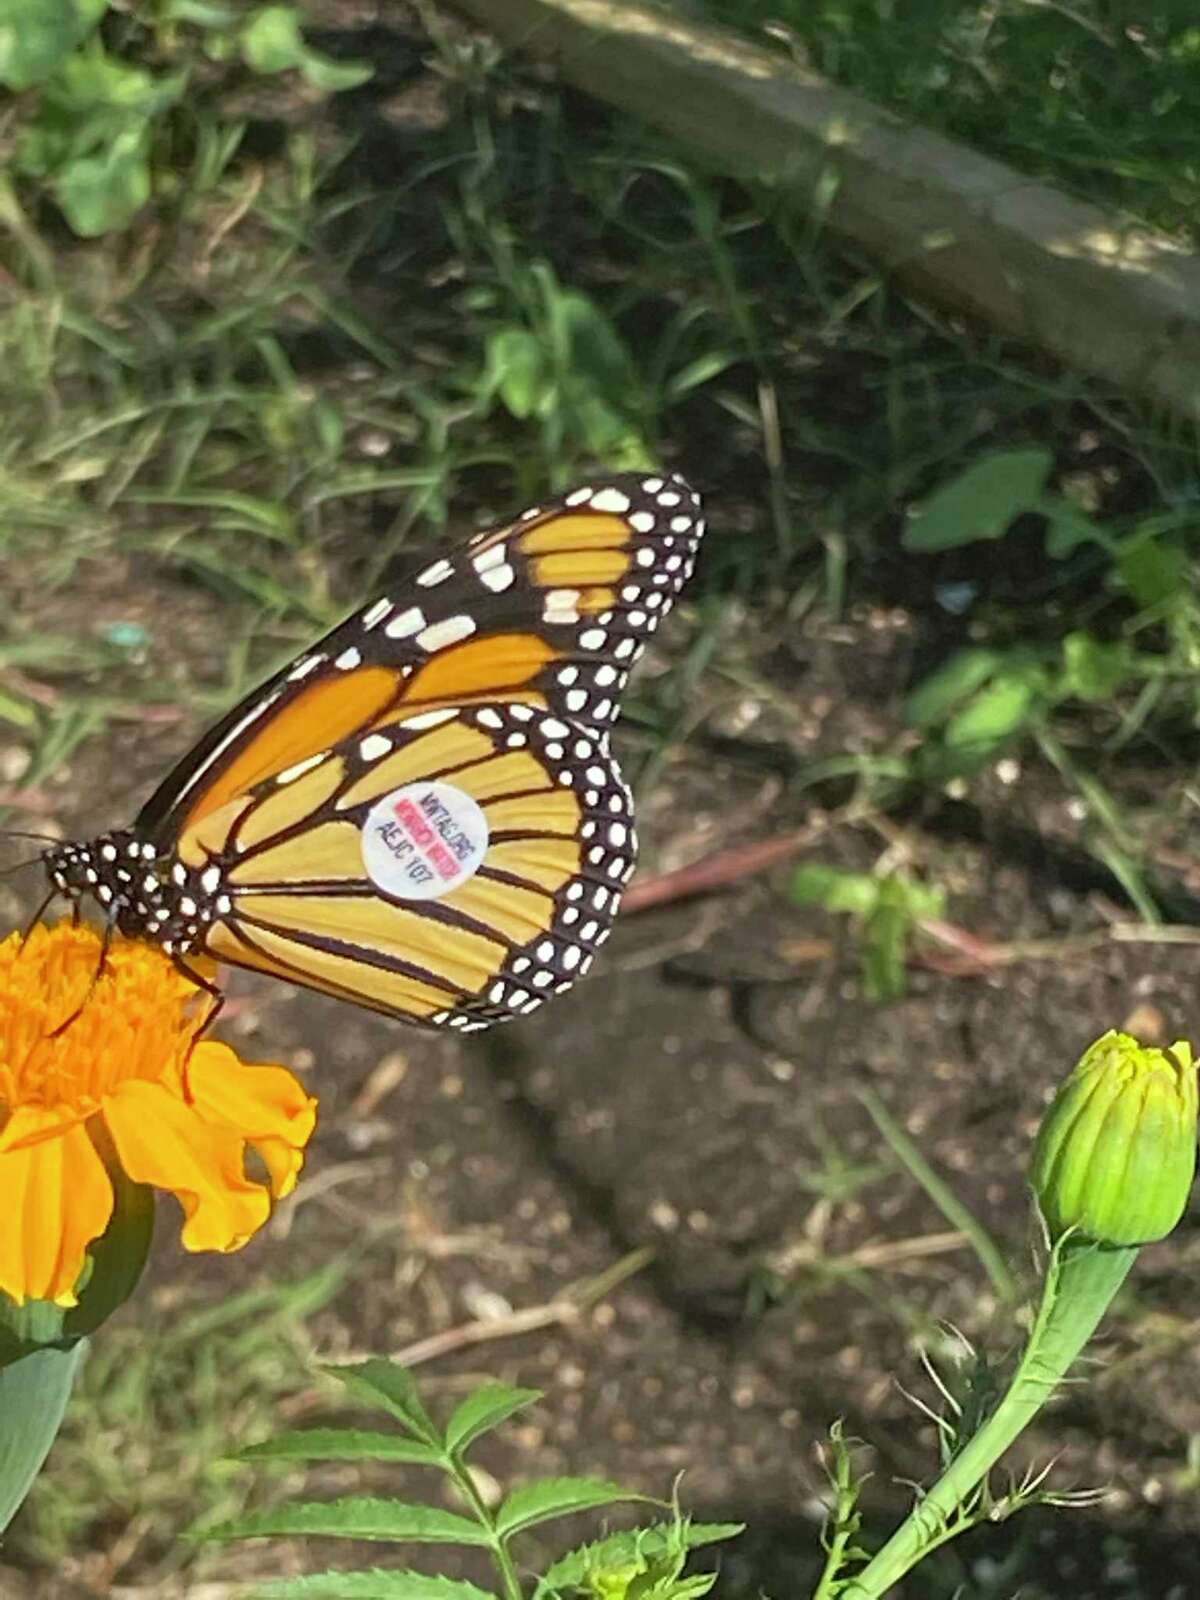 Miss Monarch’s impossible journey gives us hope. Here is the moment she was first released in San Antonio.